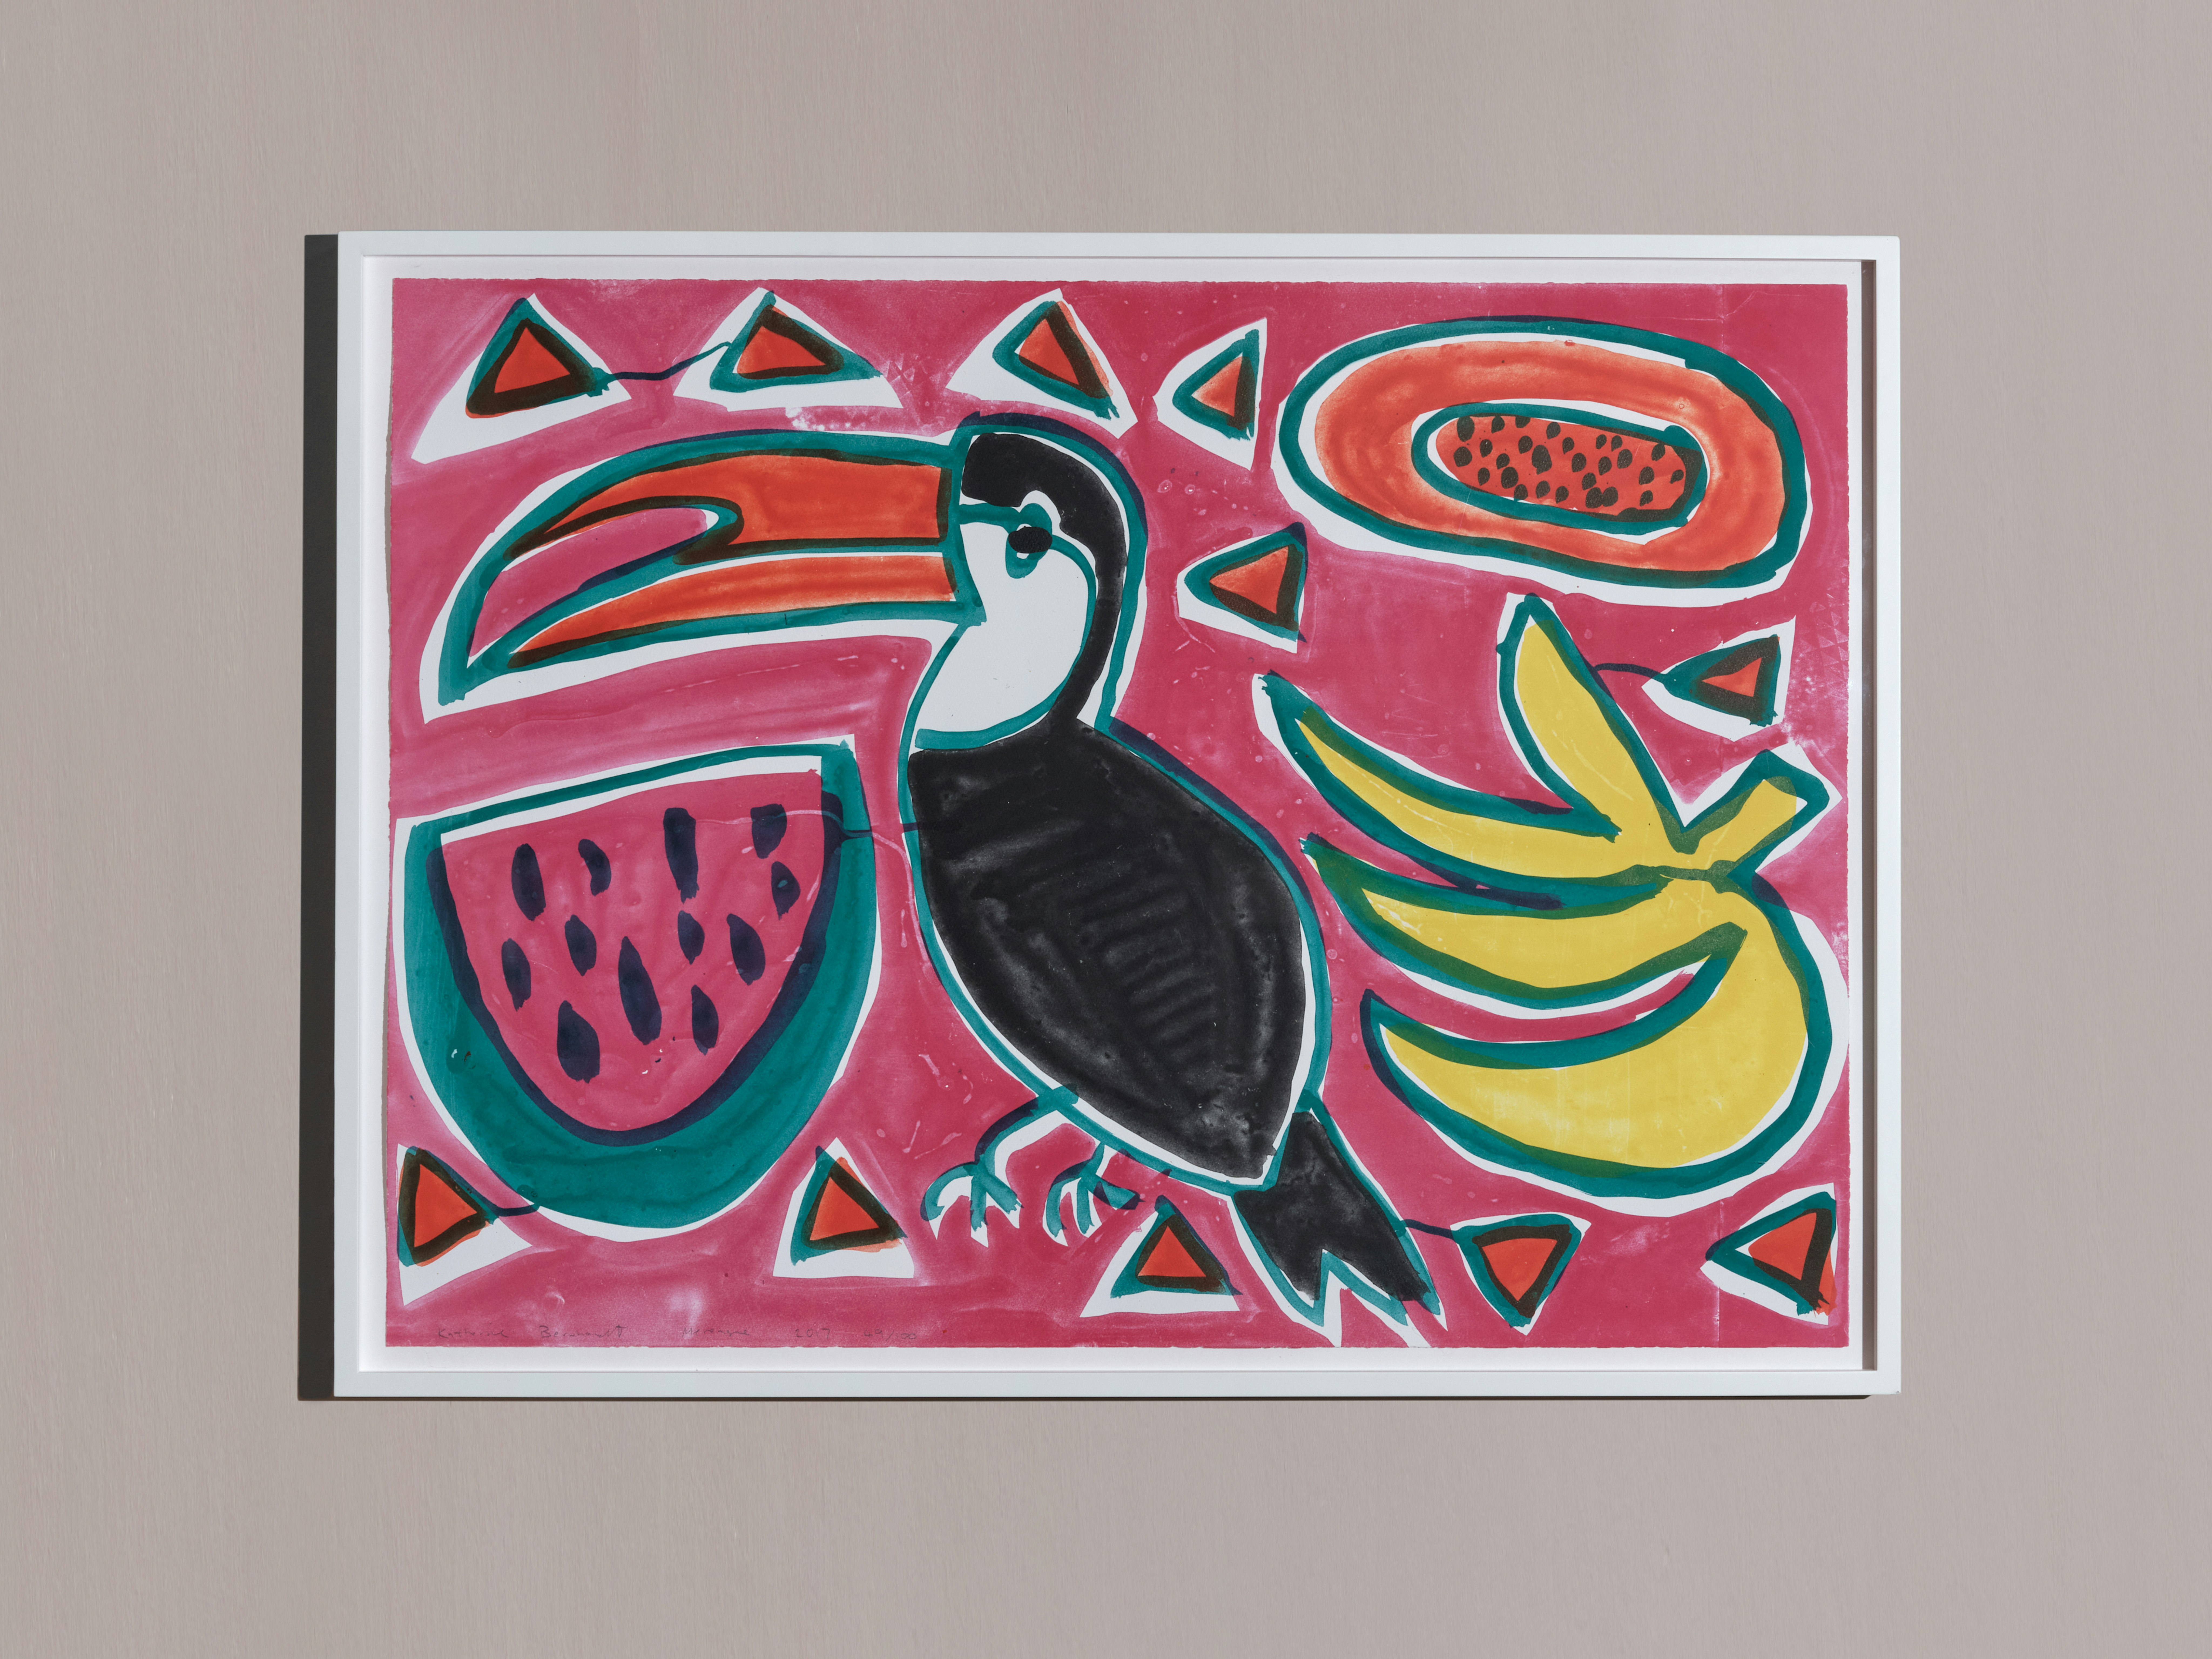 Installation photo of framed lithograph by Katherine Bernhardt depicting toucan, papaya, slice of watermelon, bananas on hot pink background